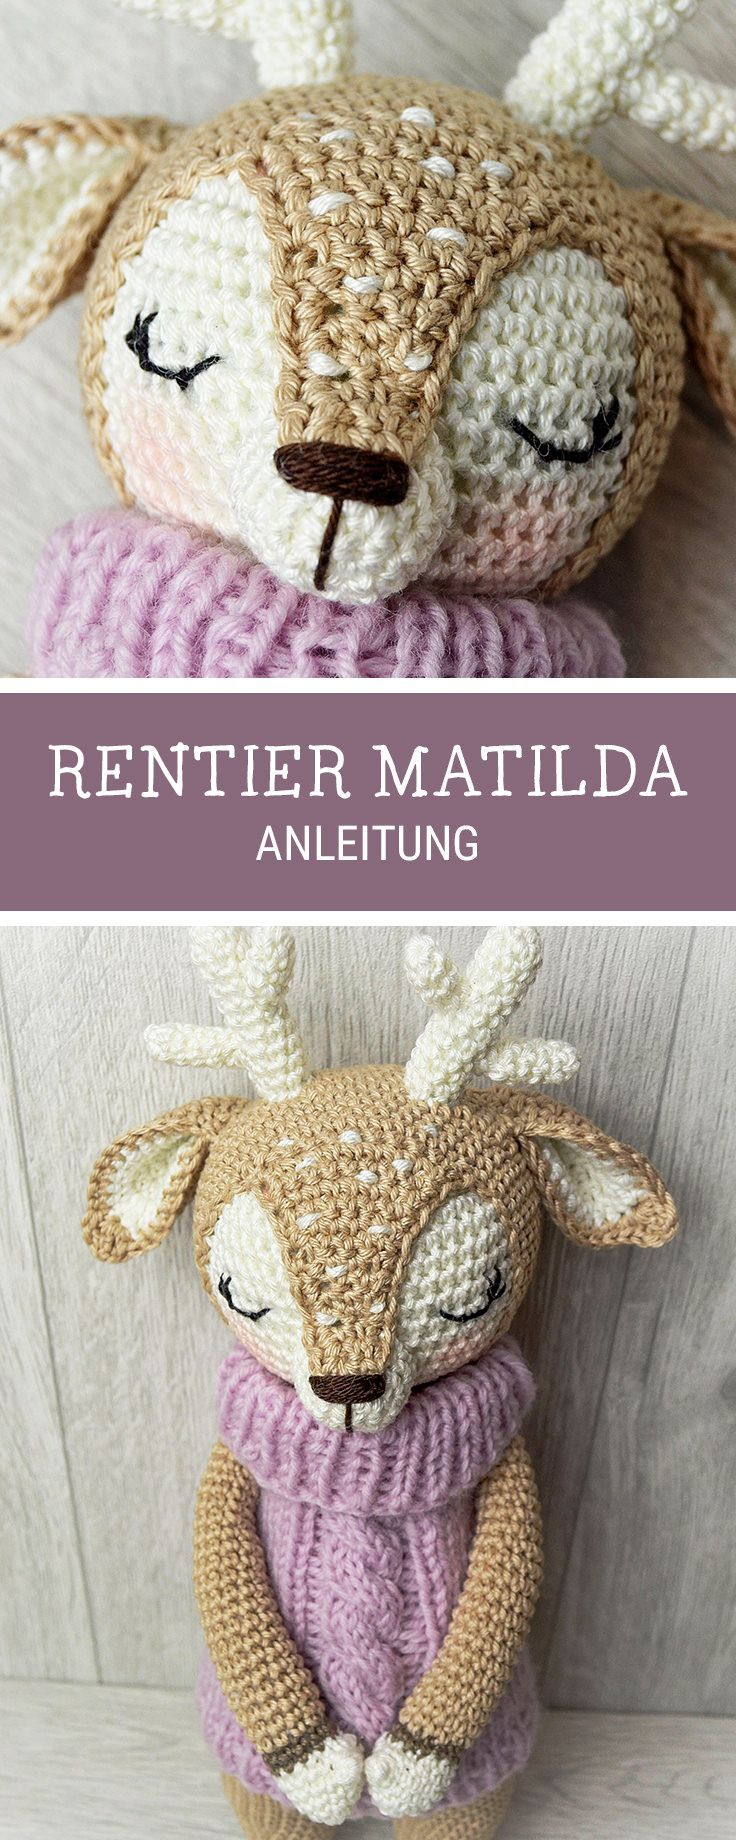 Knitting Patterns Download Knitting Patterns Toys Pdf Download For The Amigurumi Reindeer